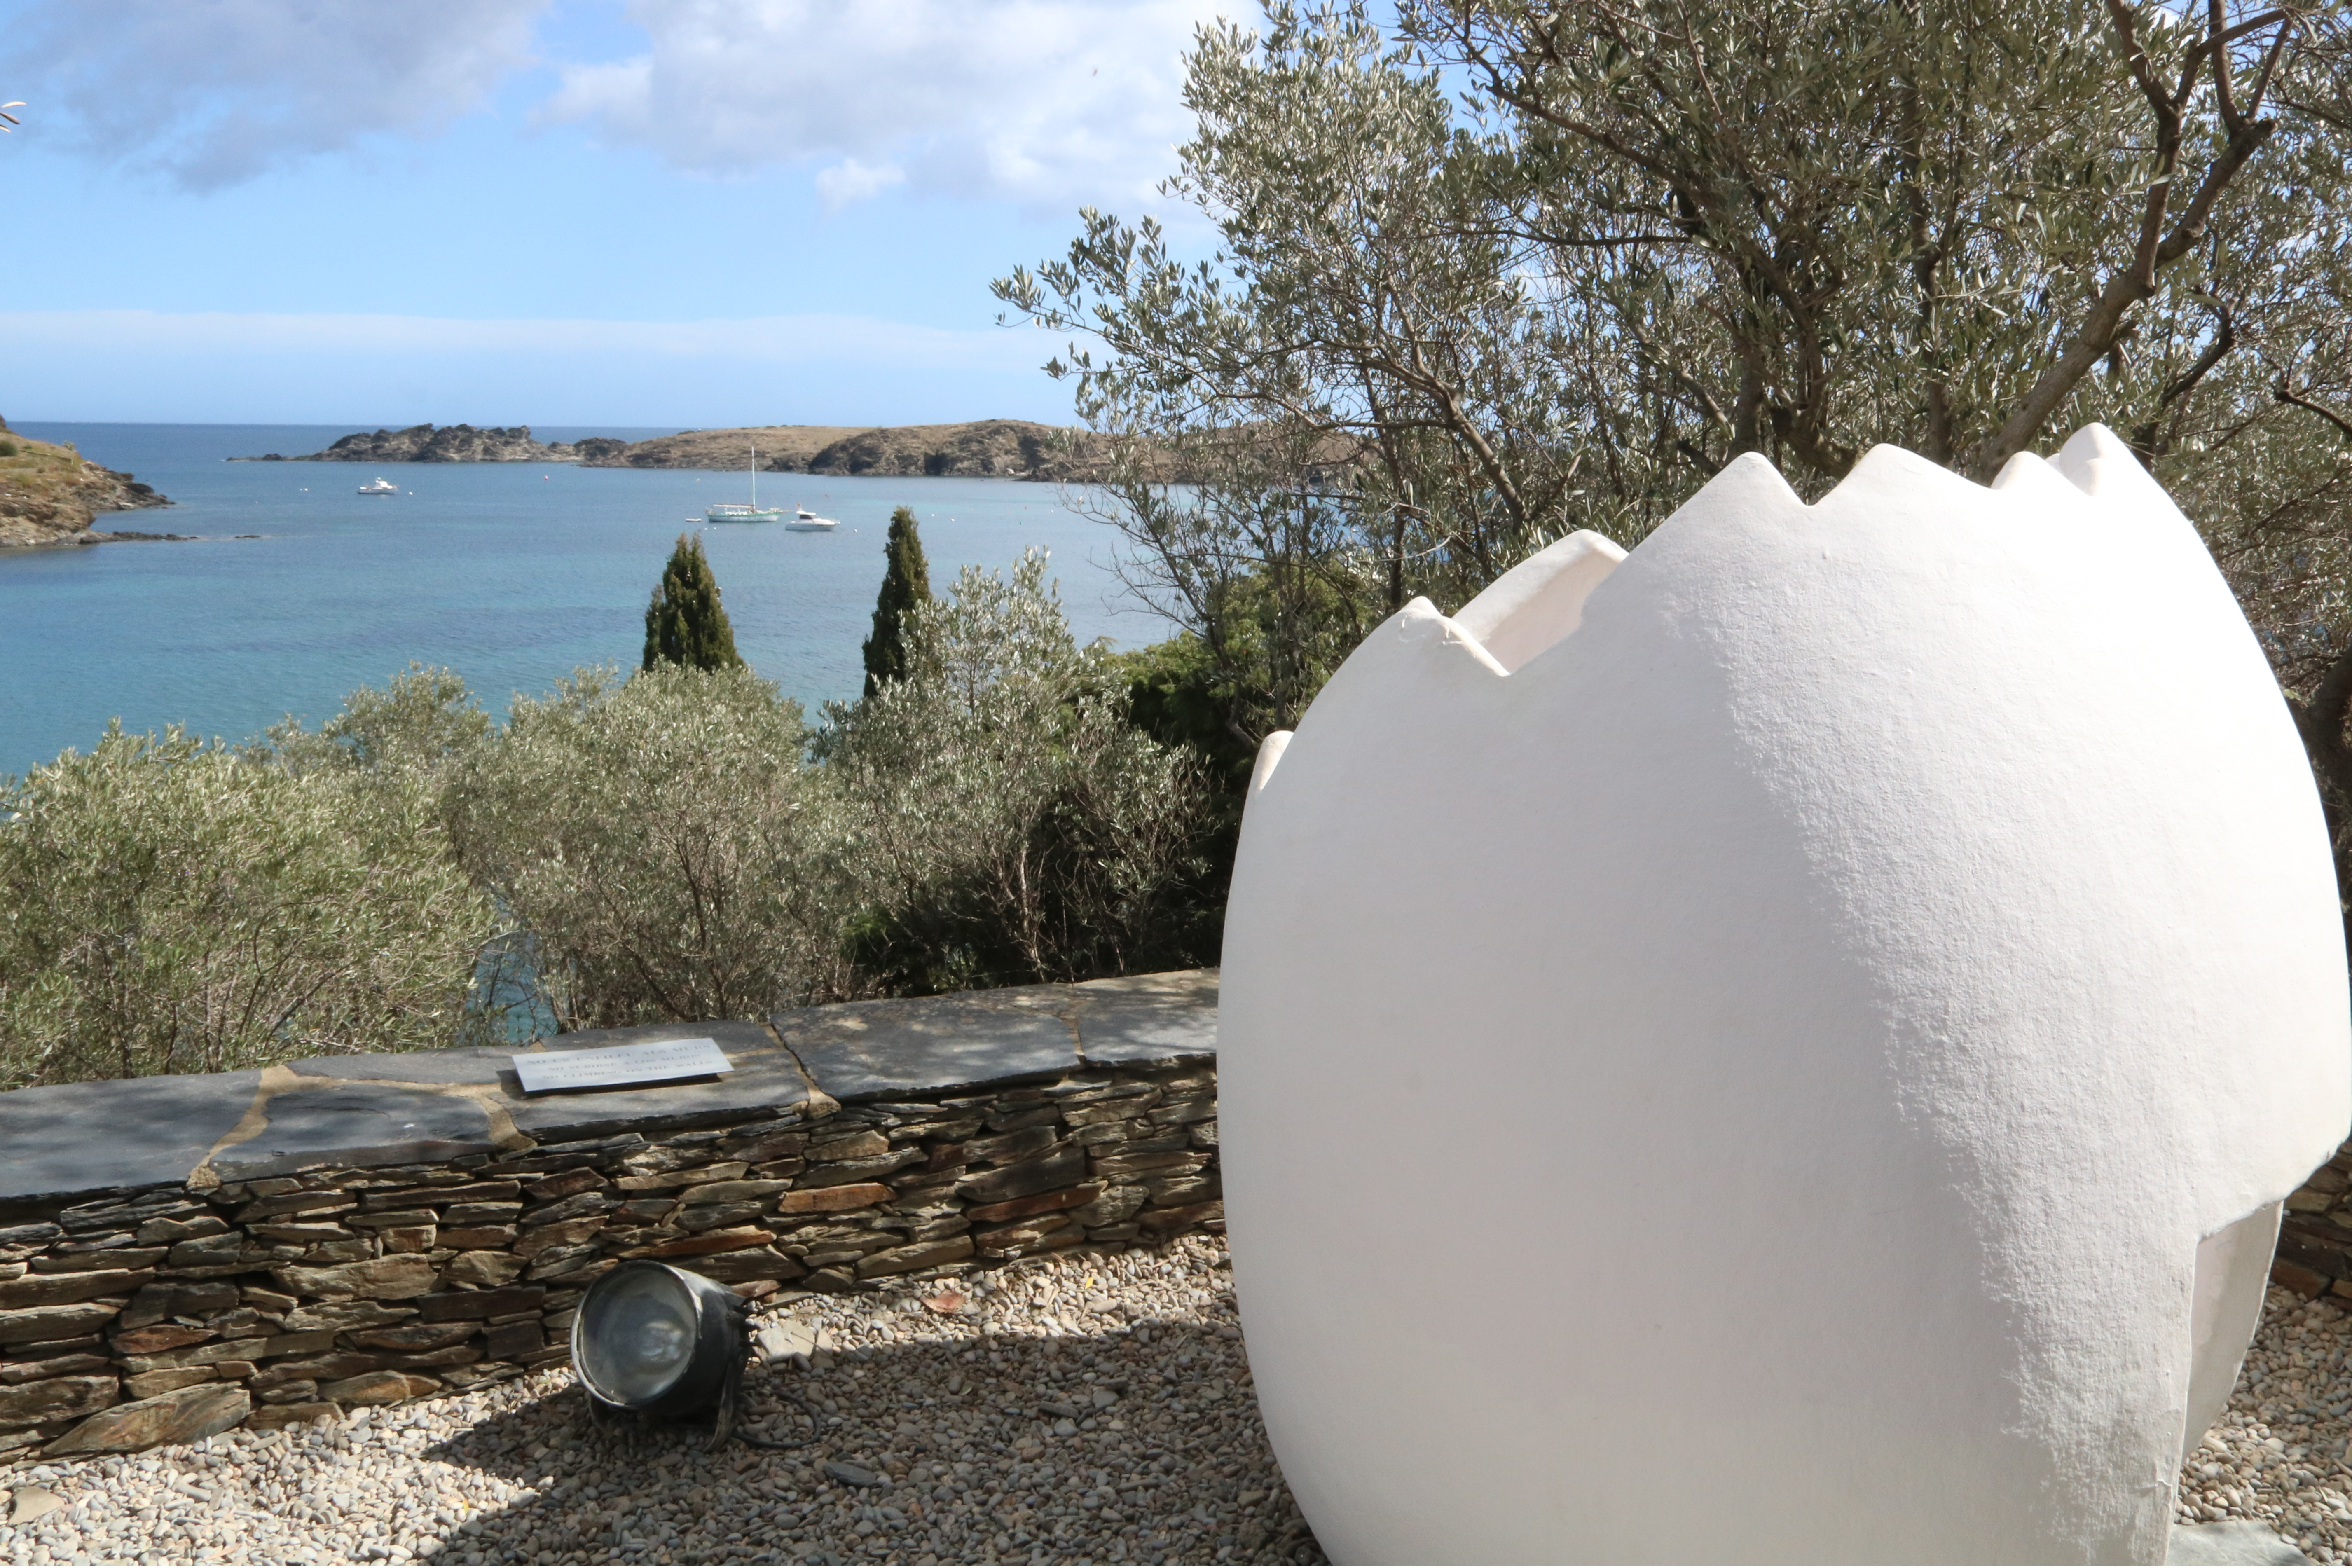 The broken egg, one of Salvador Dalí's most famous pieces, installed in his 'Casa-Museu,' in Portlligat, Cadaqués